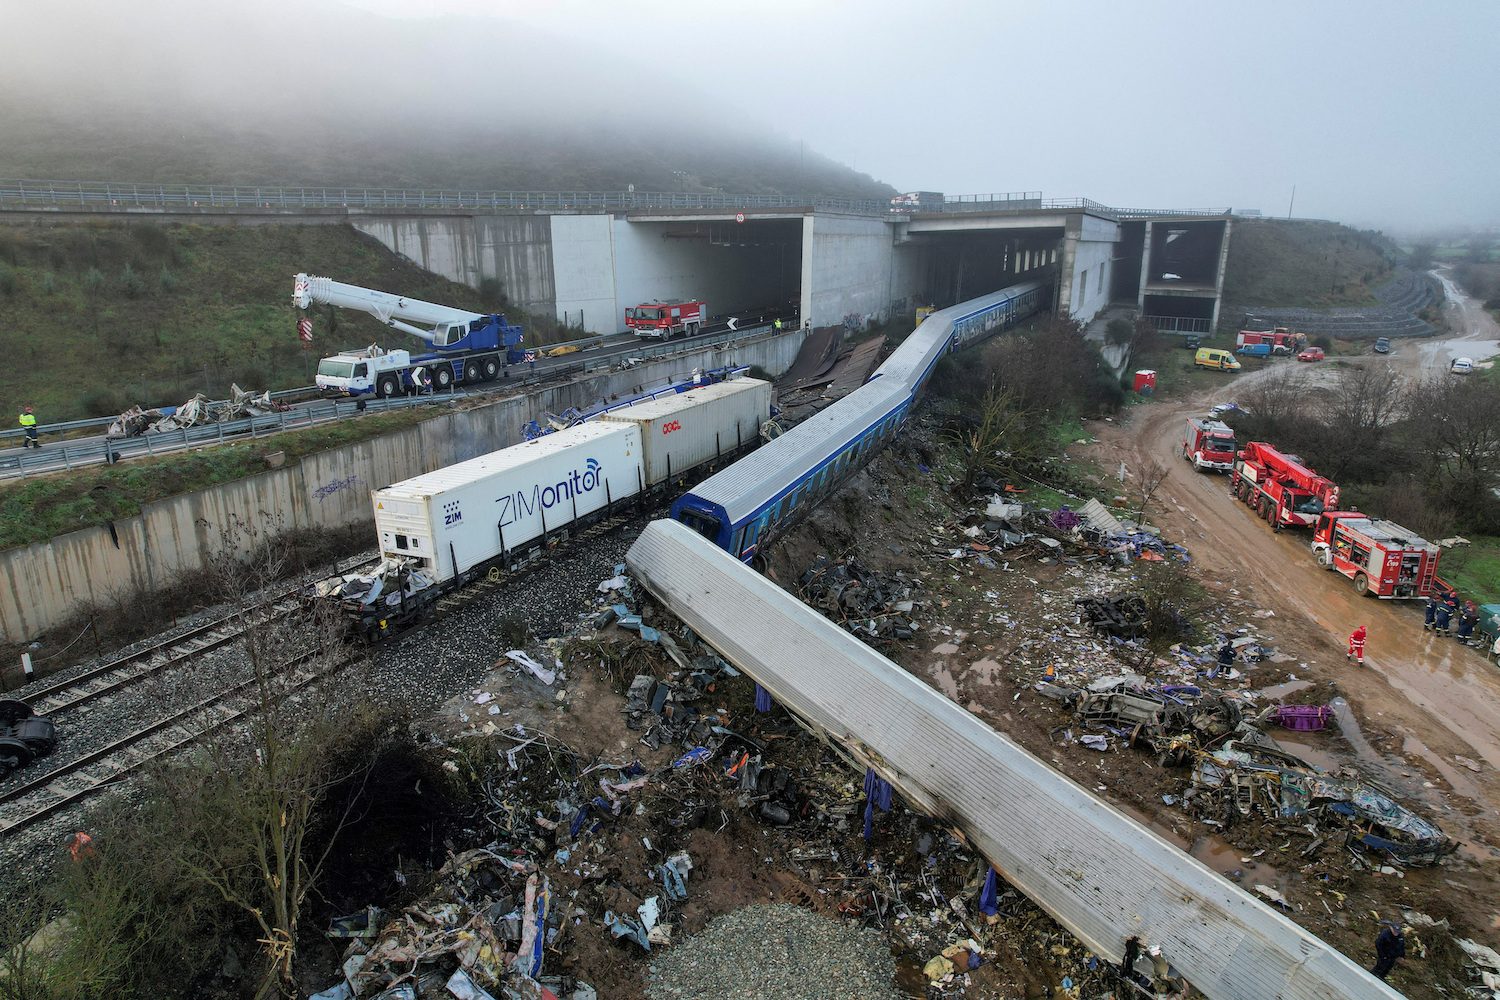 Greece train disaster exposes rail network neglect